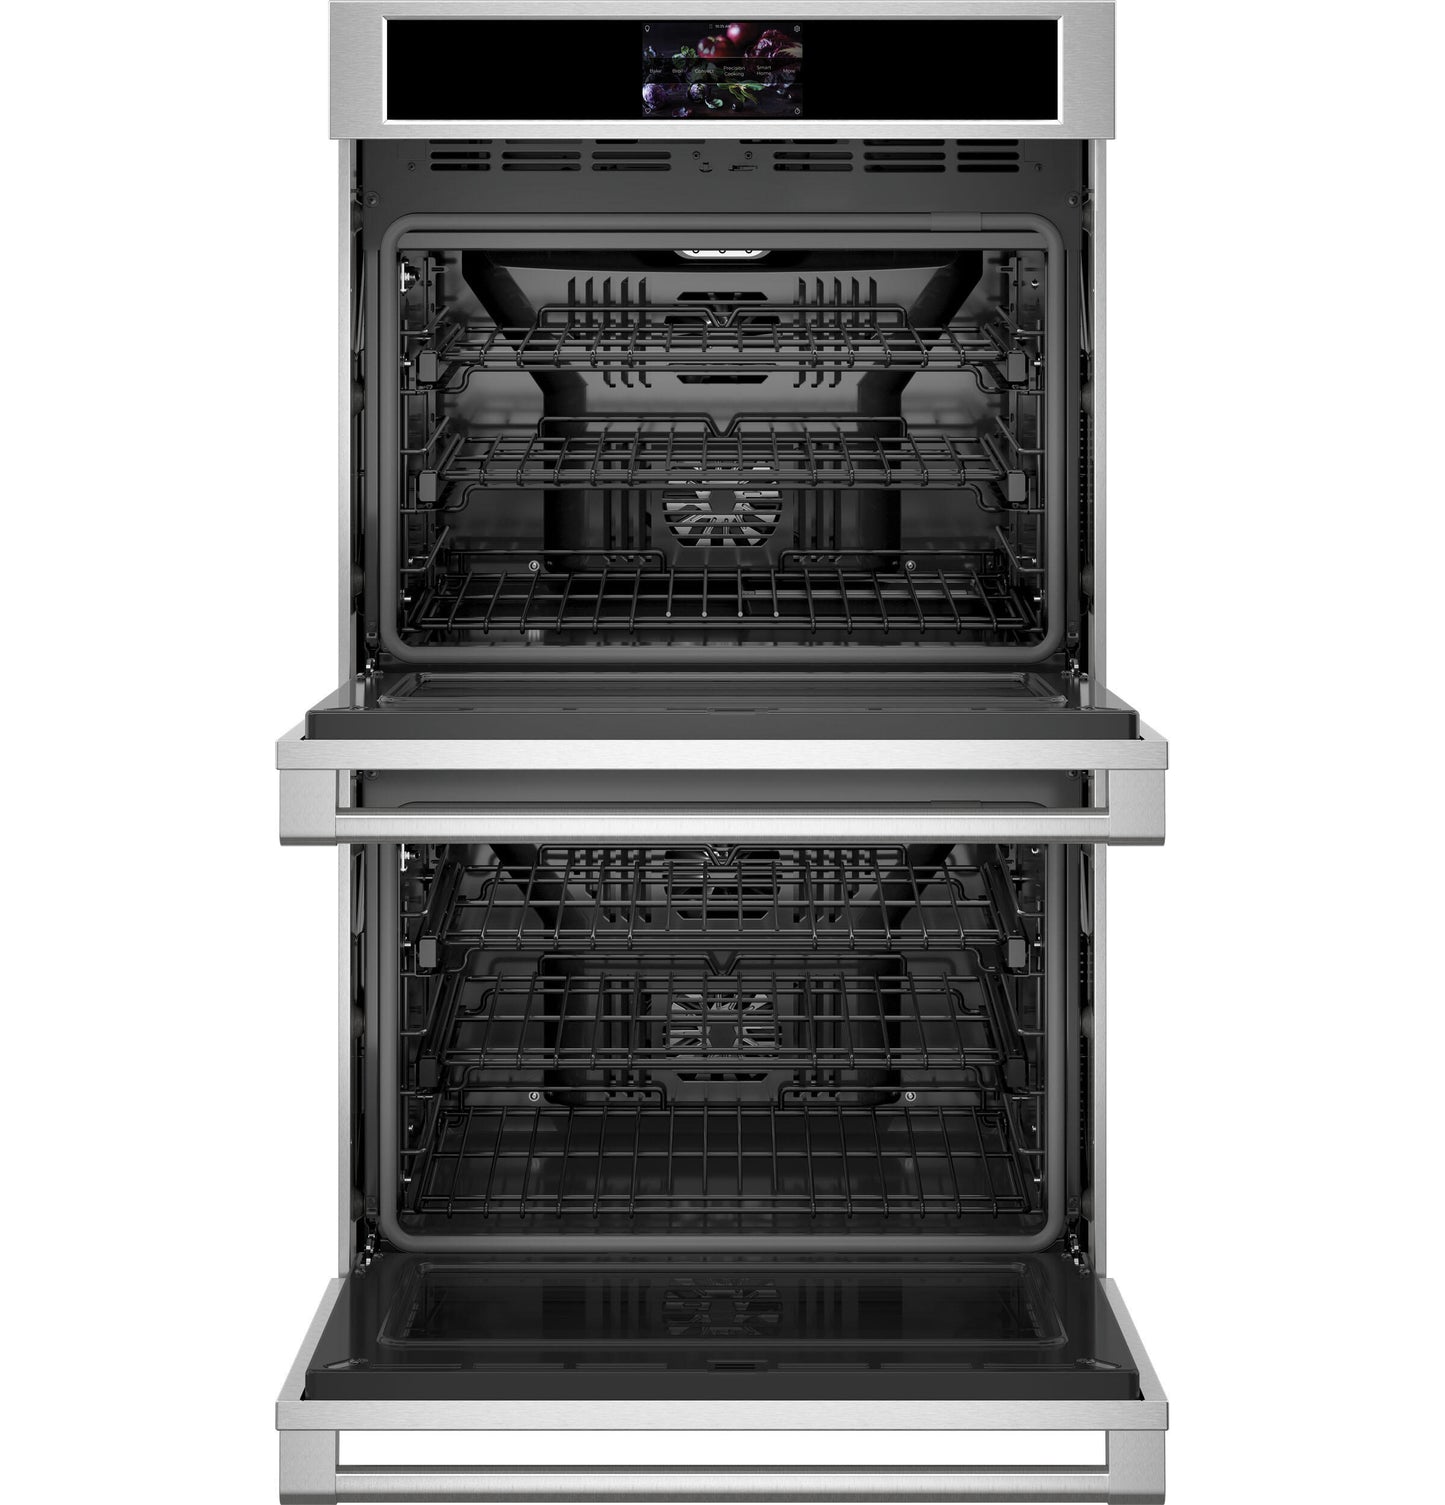 Monogram ZTDX1DPSNSS Monogram 30" Smart Electric Convection Double Wall Oven Statement Collection